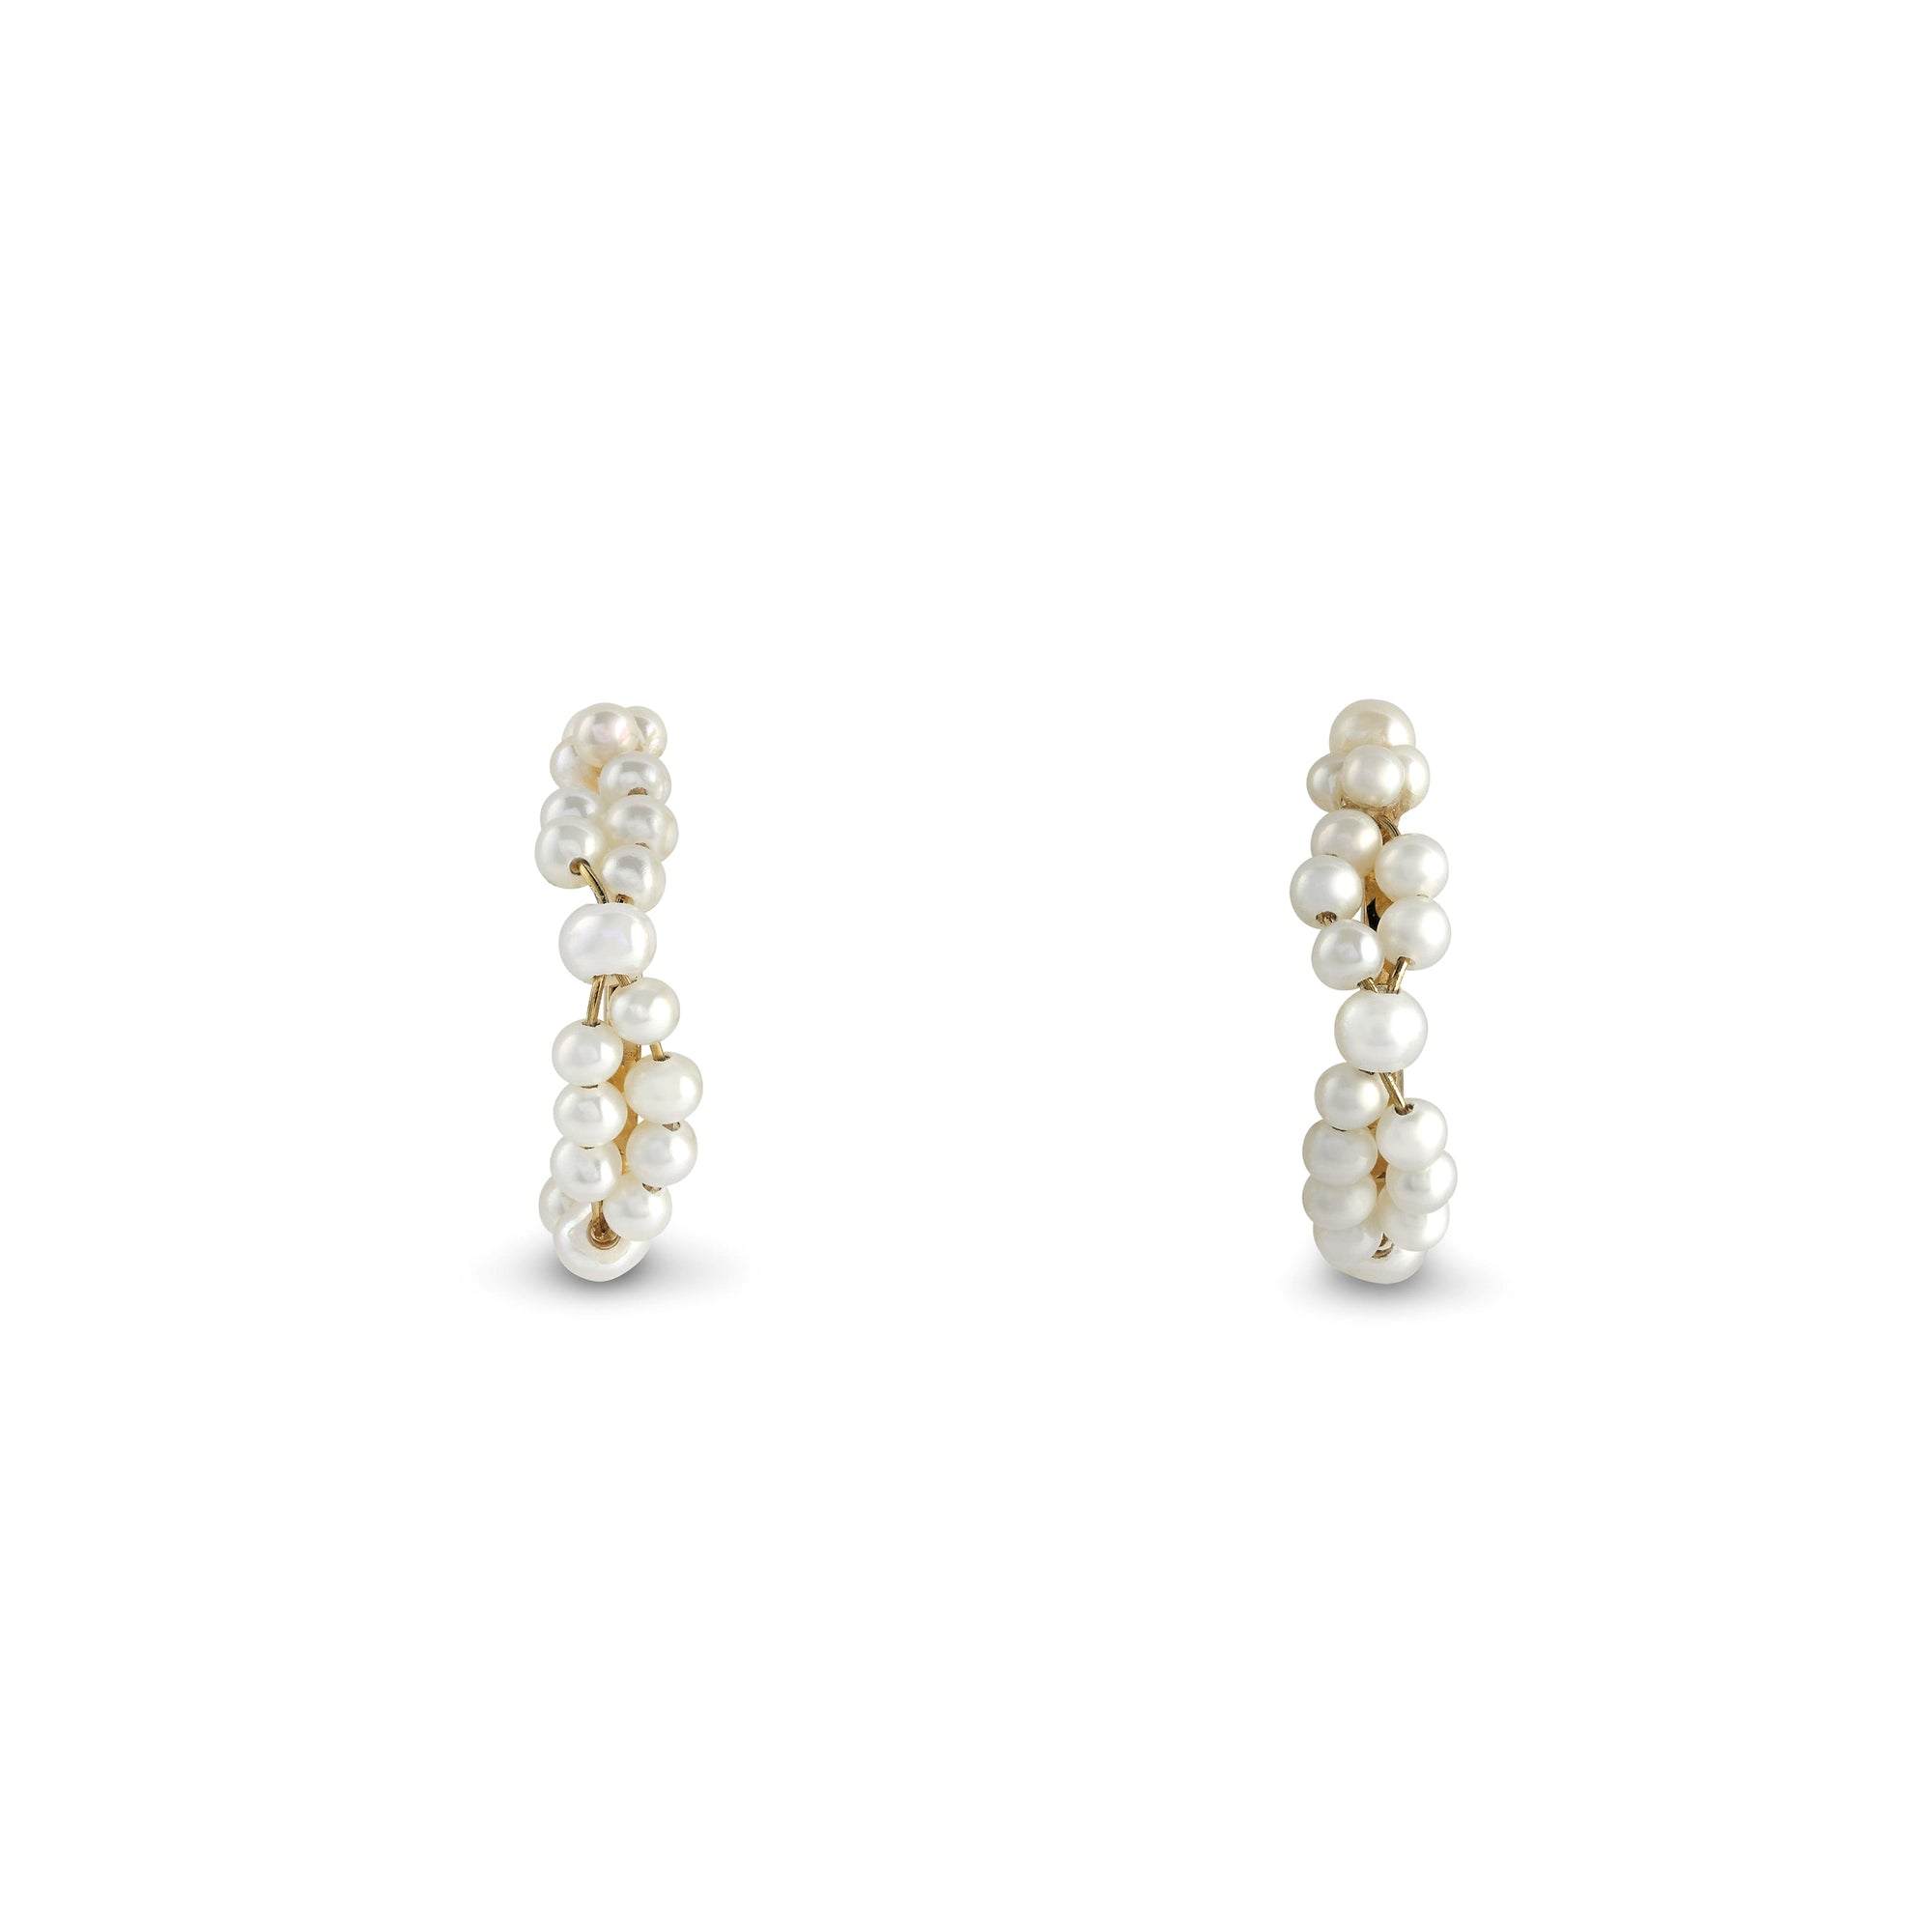 Completedworks - Stratus Earrings with Fresh Water Pearls - (Pearl) view 3